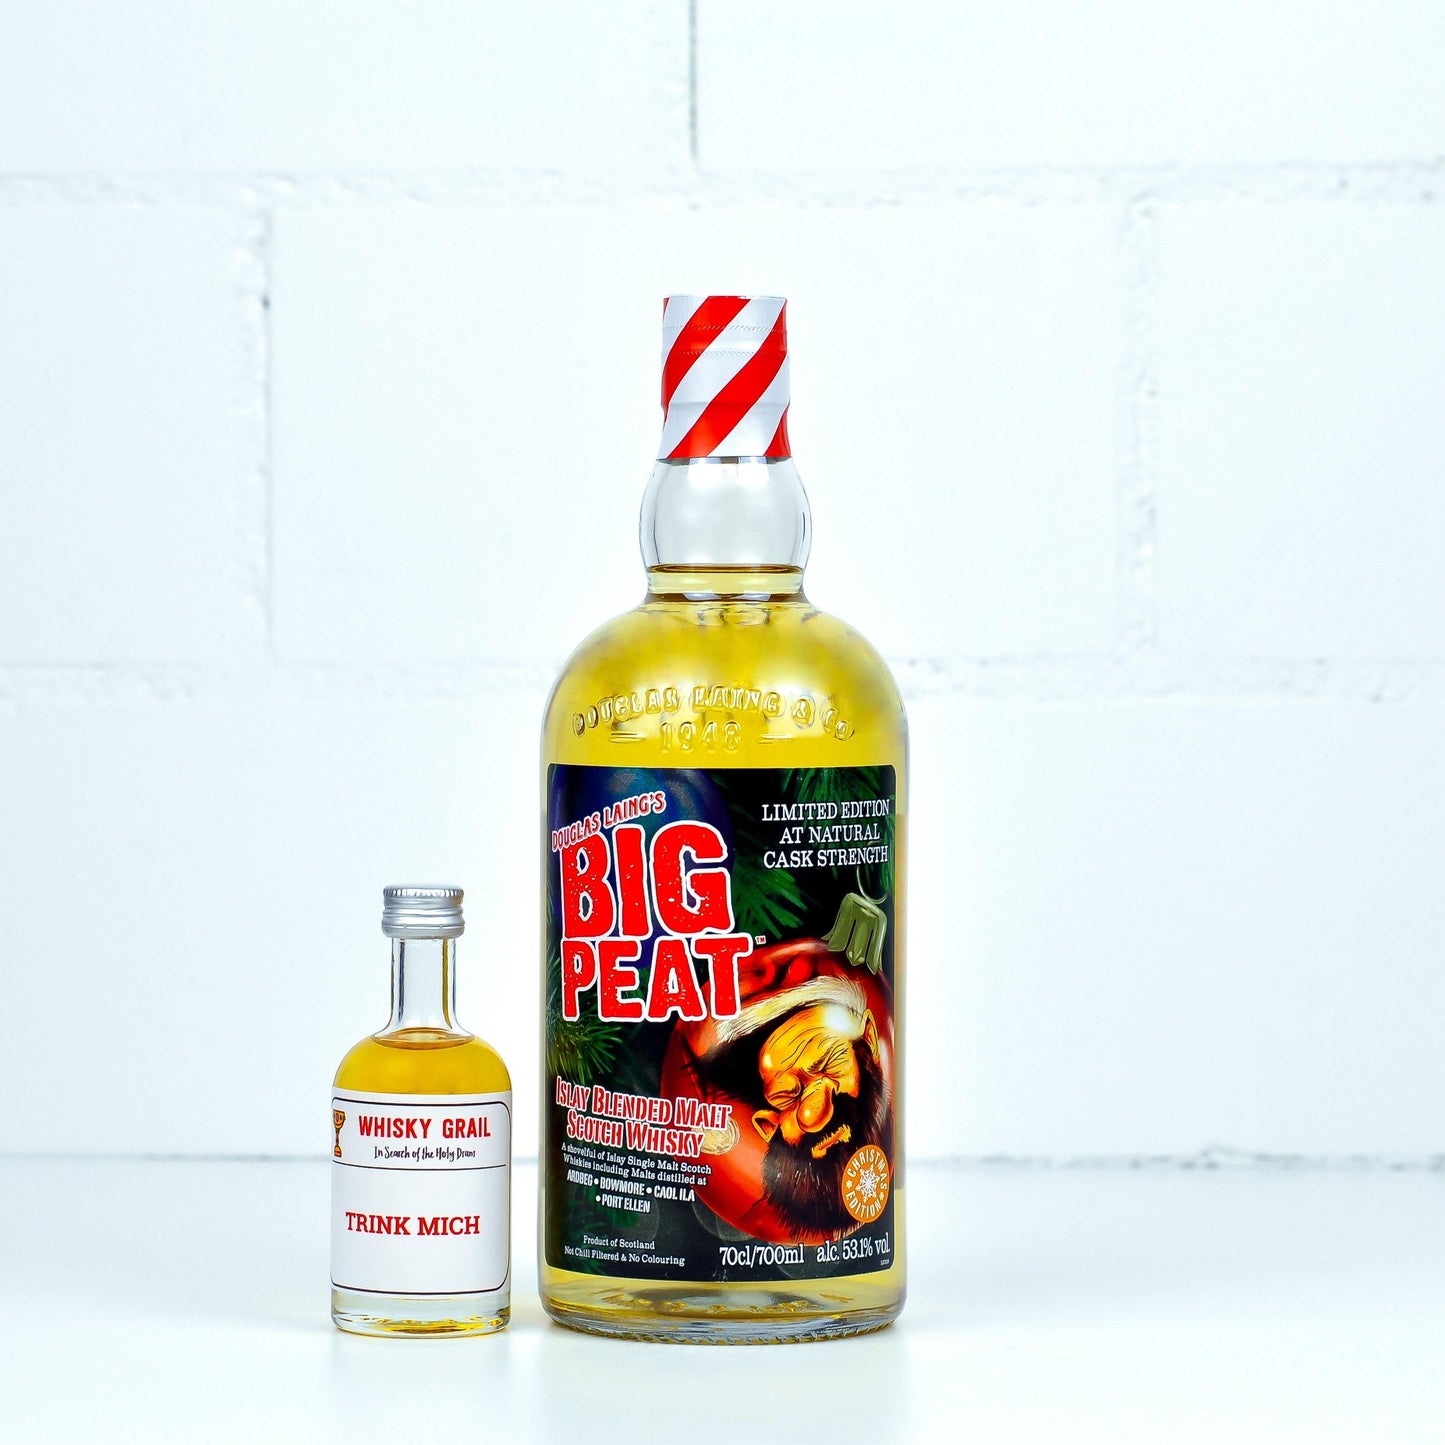 Big Peat Christmas Edition 2020 5cl - Whisky Grail